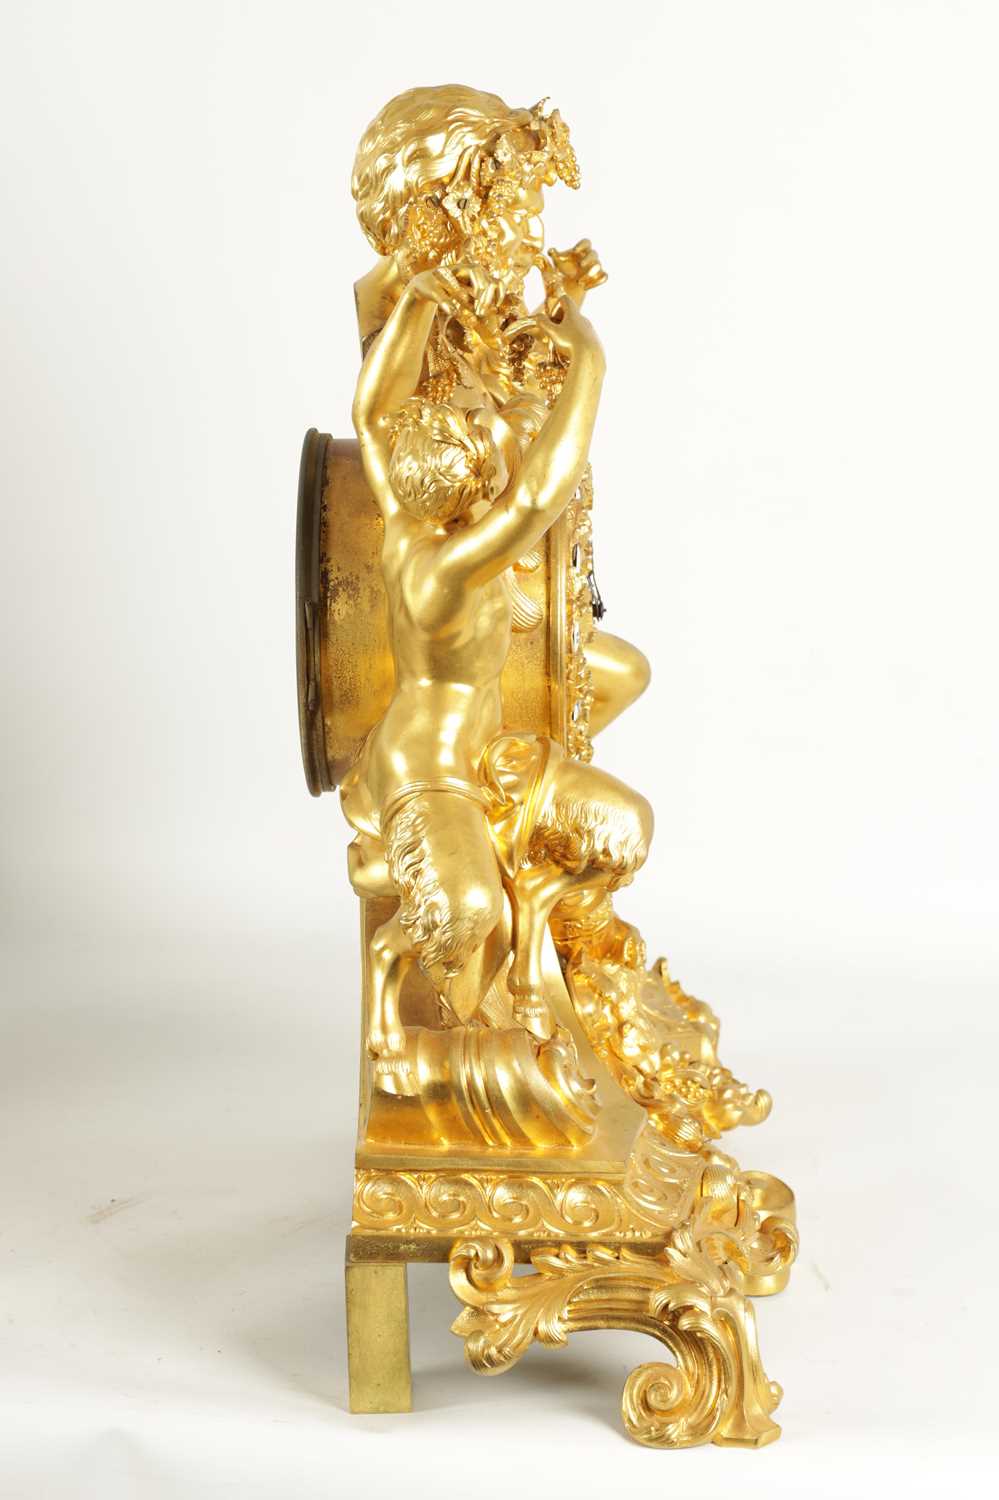 A FINE QUALITY MID 19TH CENTURY FRENCH ORMOLU FIGURAL MANTEL CLOCK - Image 11 of 11